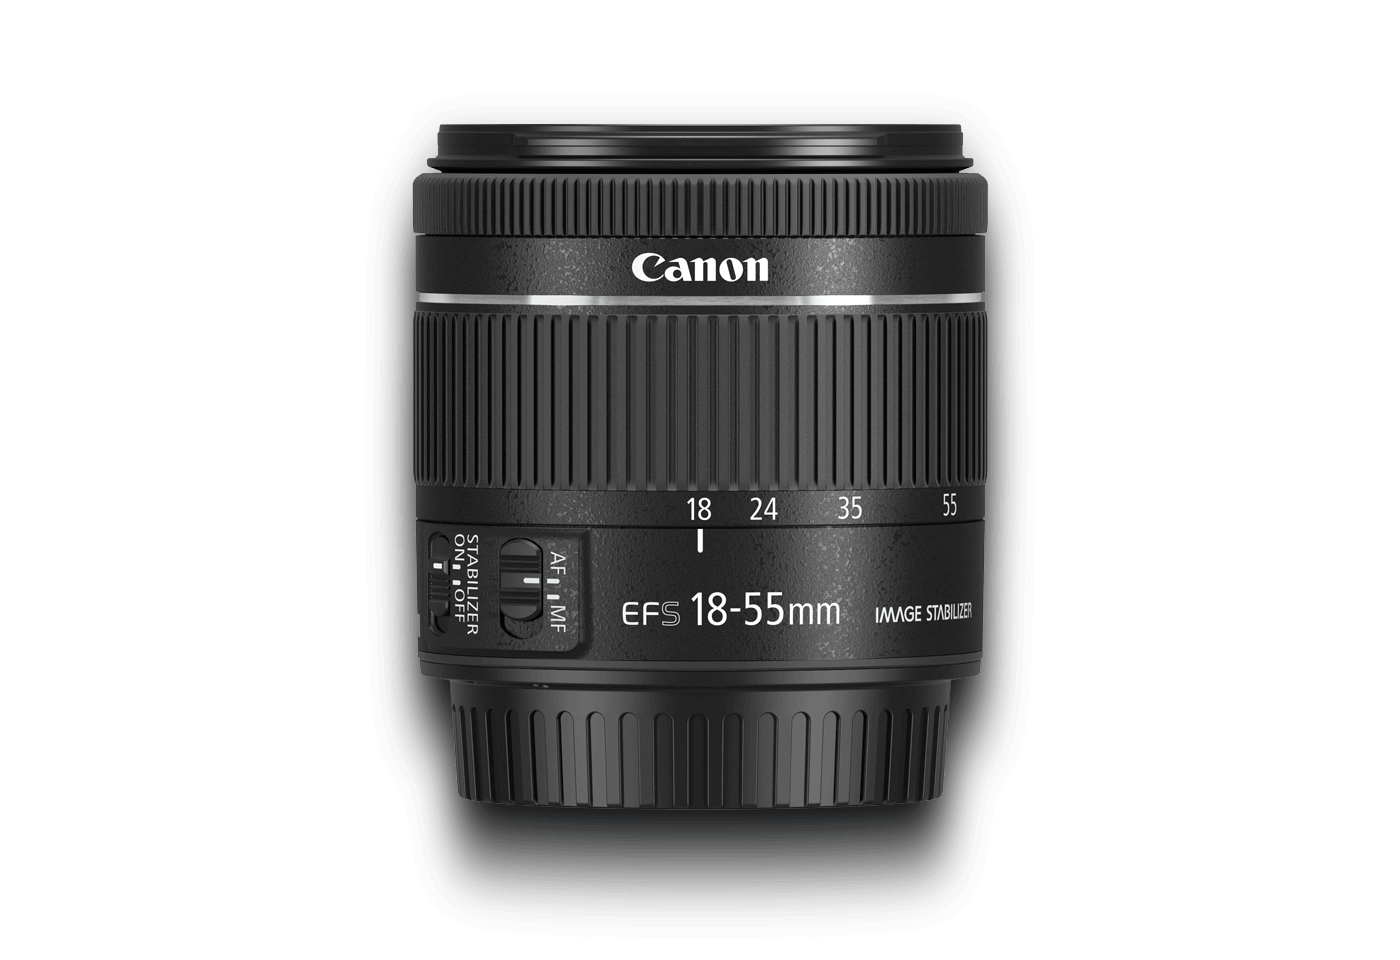 EF-S 18-55mm f/4-5.6 IS STM (compact) - Canon Cameras Sri Lanka